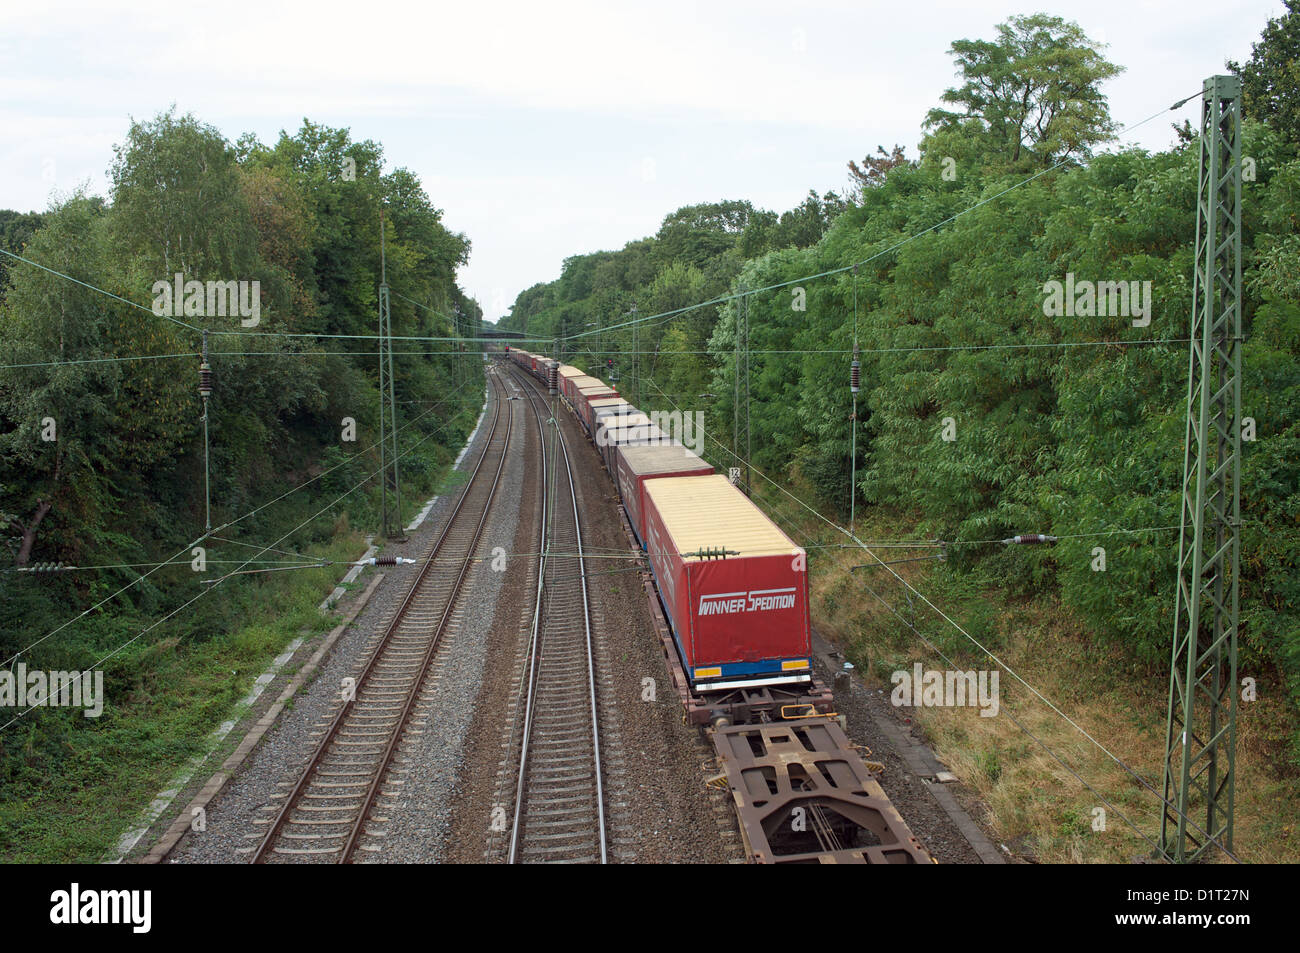 Freight train hauling covered lorry trailers owned by operator Winner Spedition, Leichlingen, Germany. Stock Photo